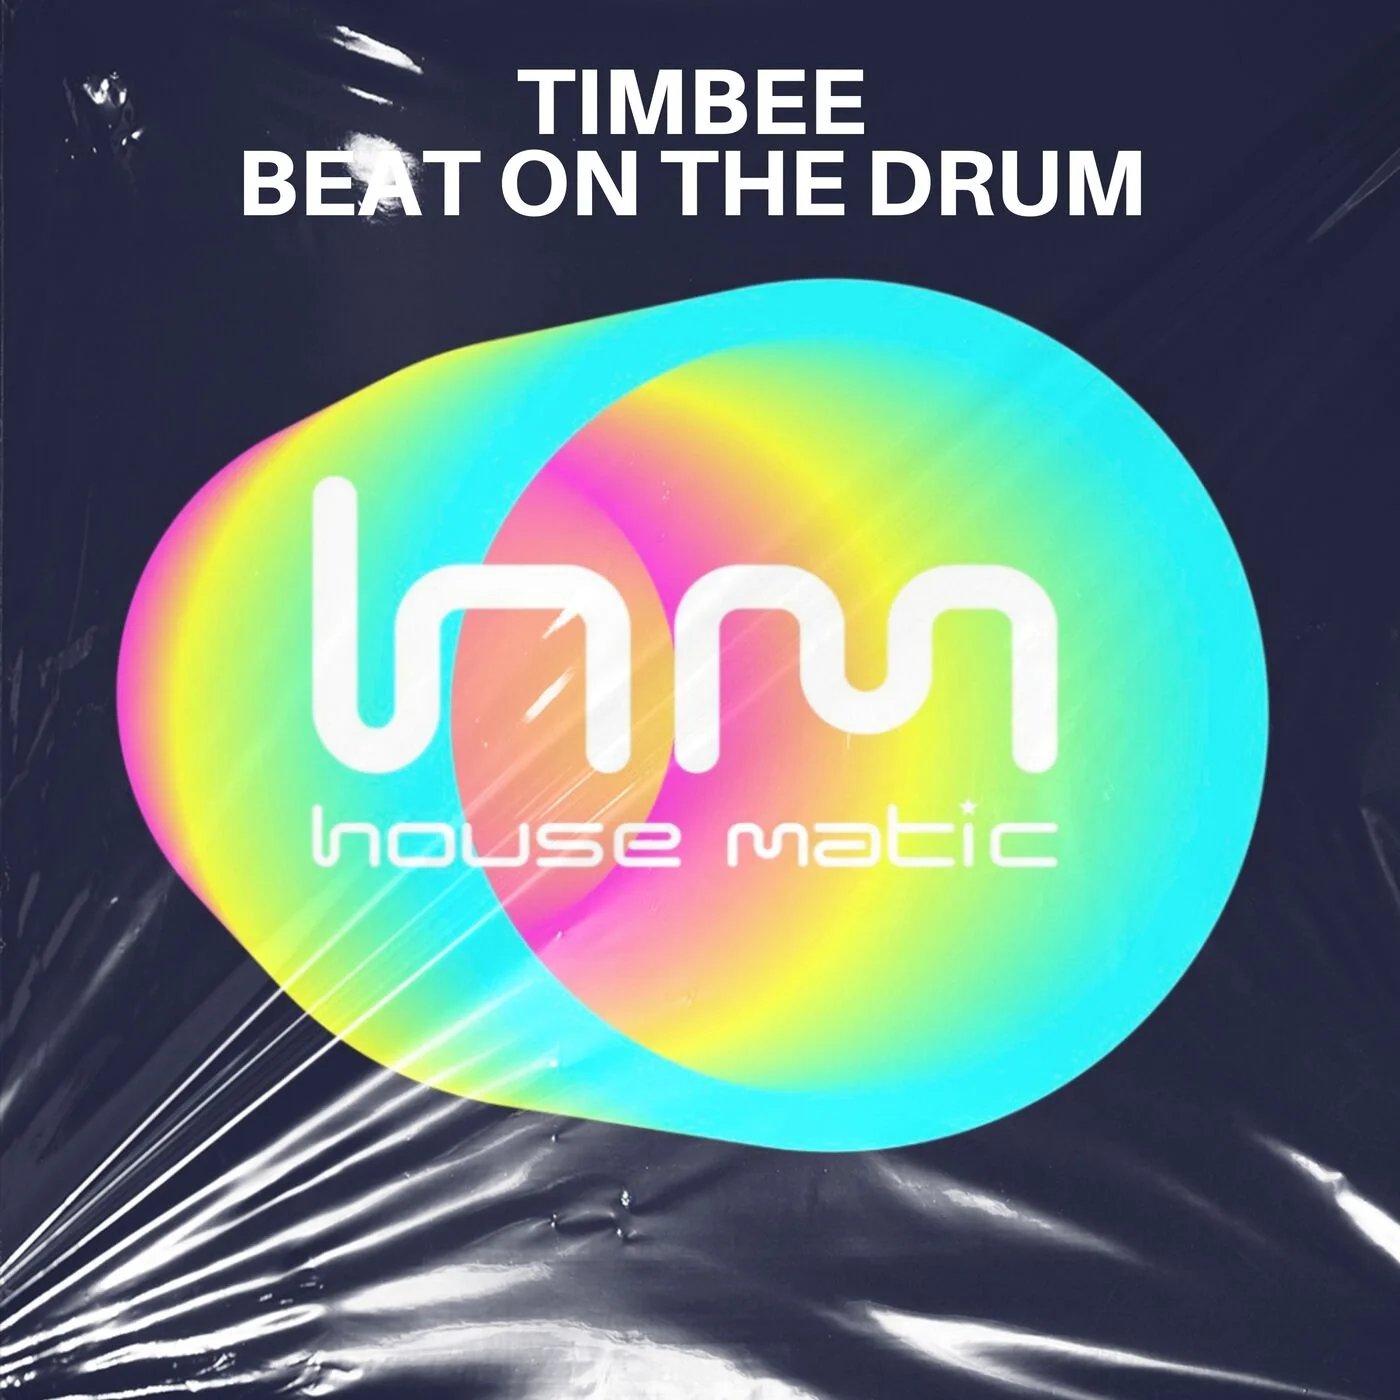 Timbee - Beat on the Drum (Original Mix)